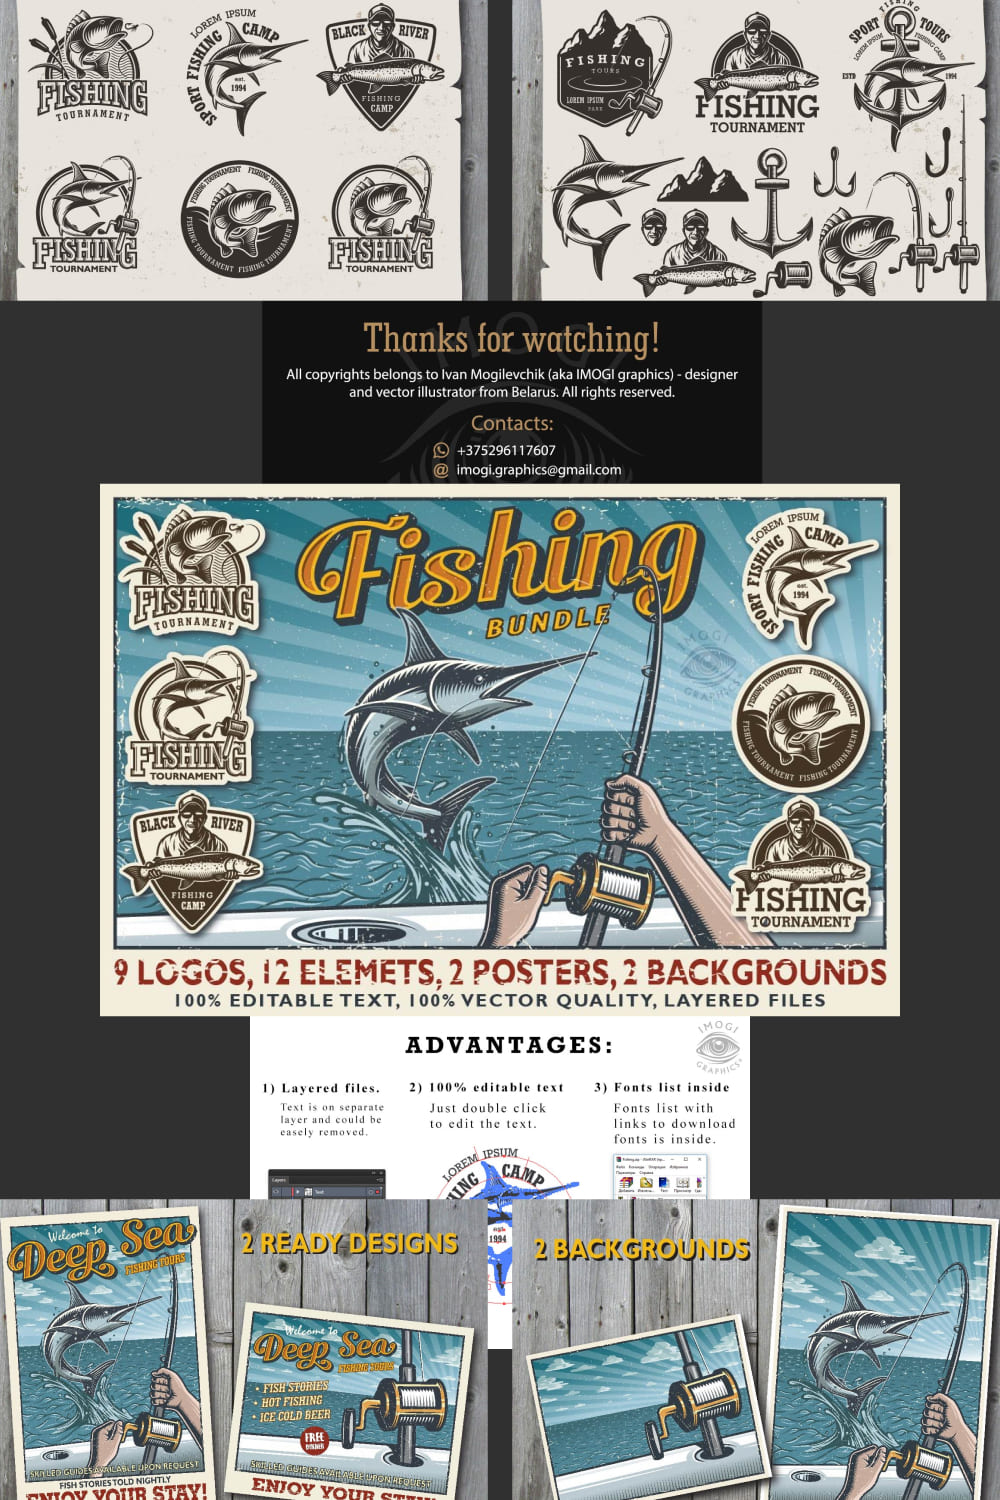 So stylish fishing illustrations for different purposes.